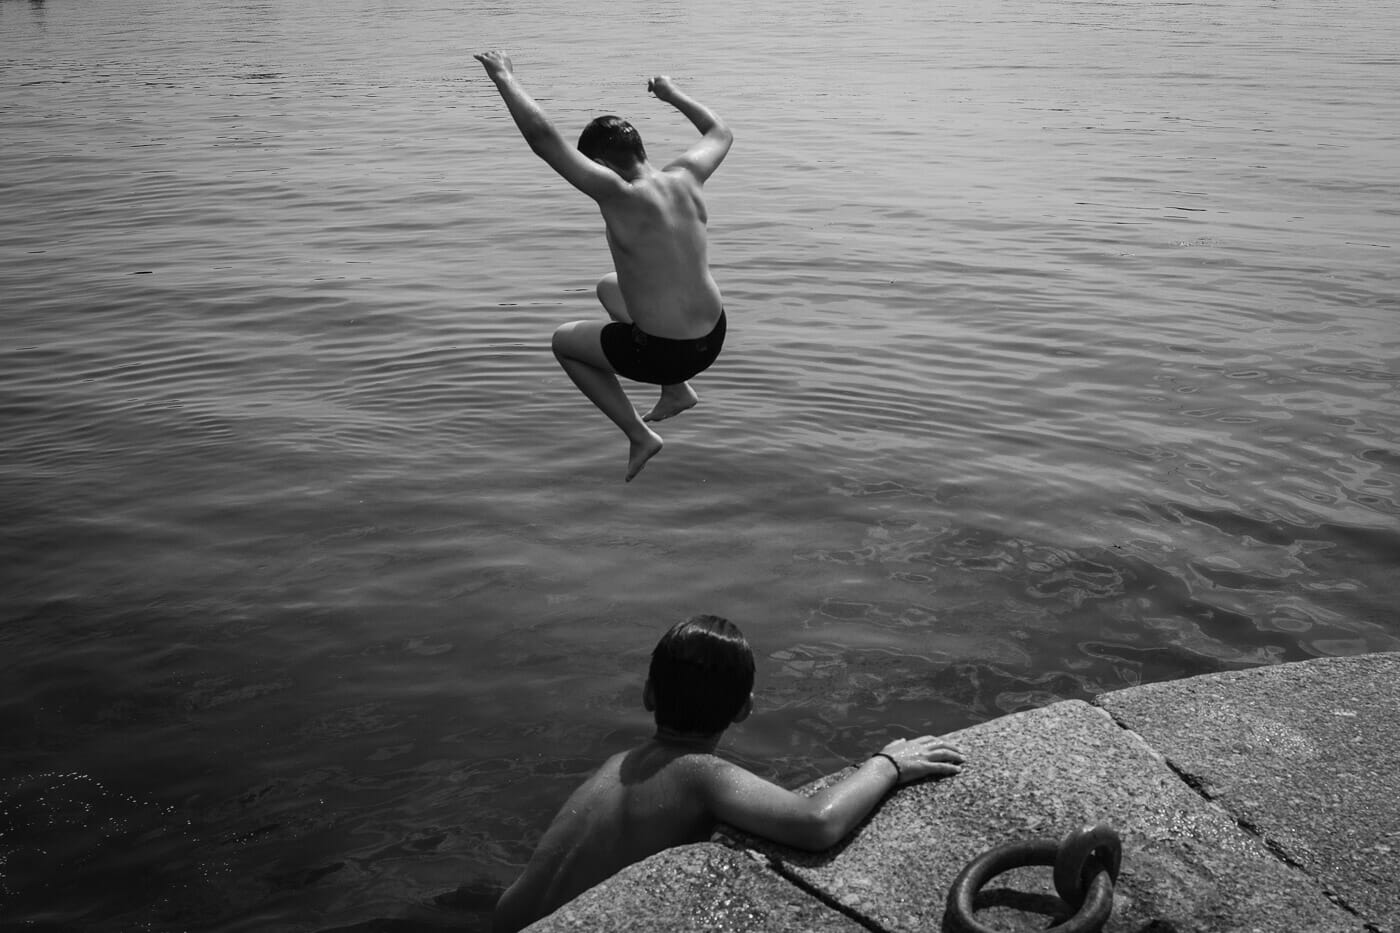 Two boys jumping off a platform into water.